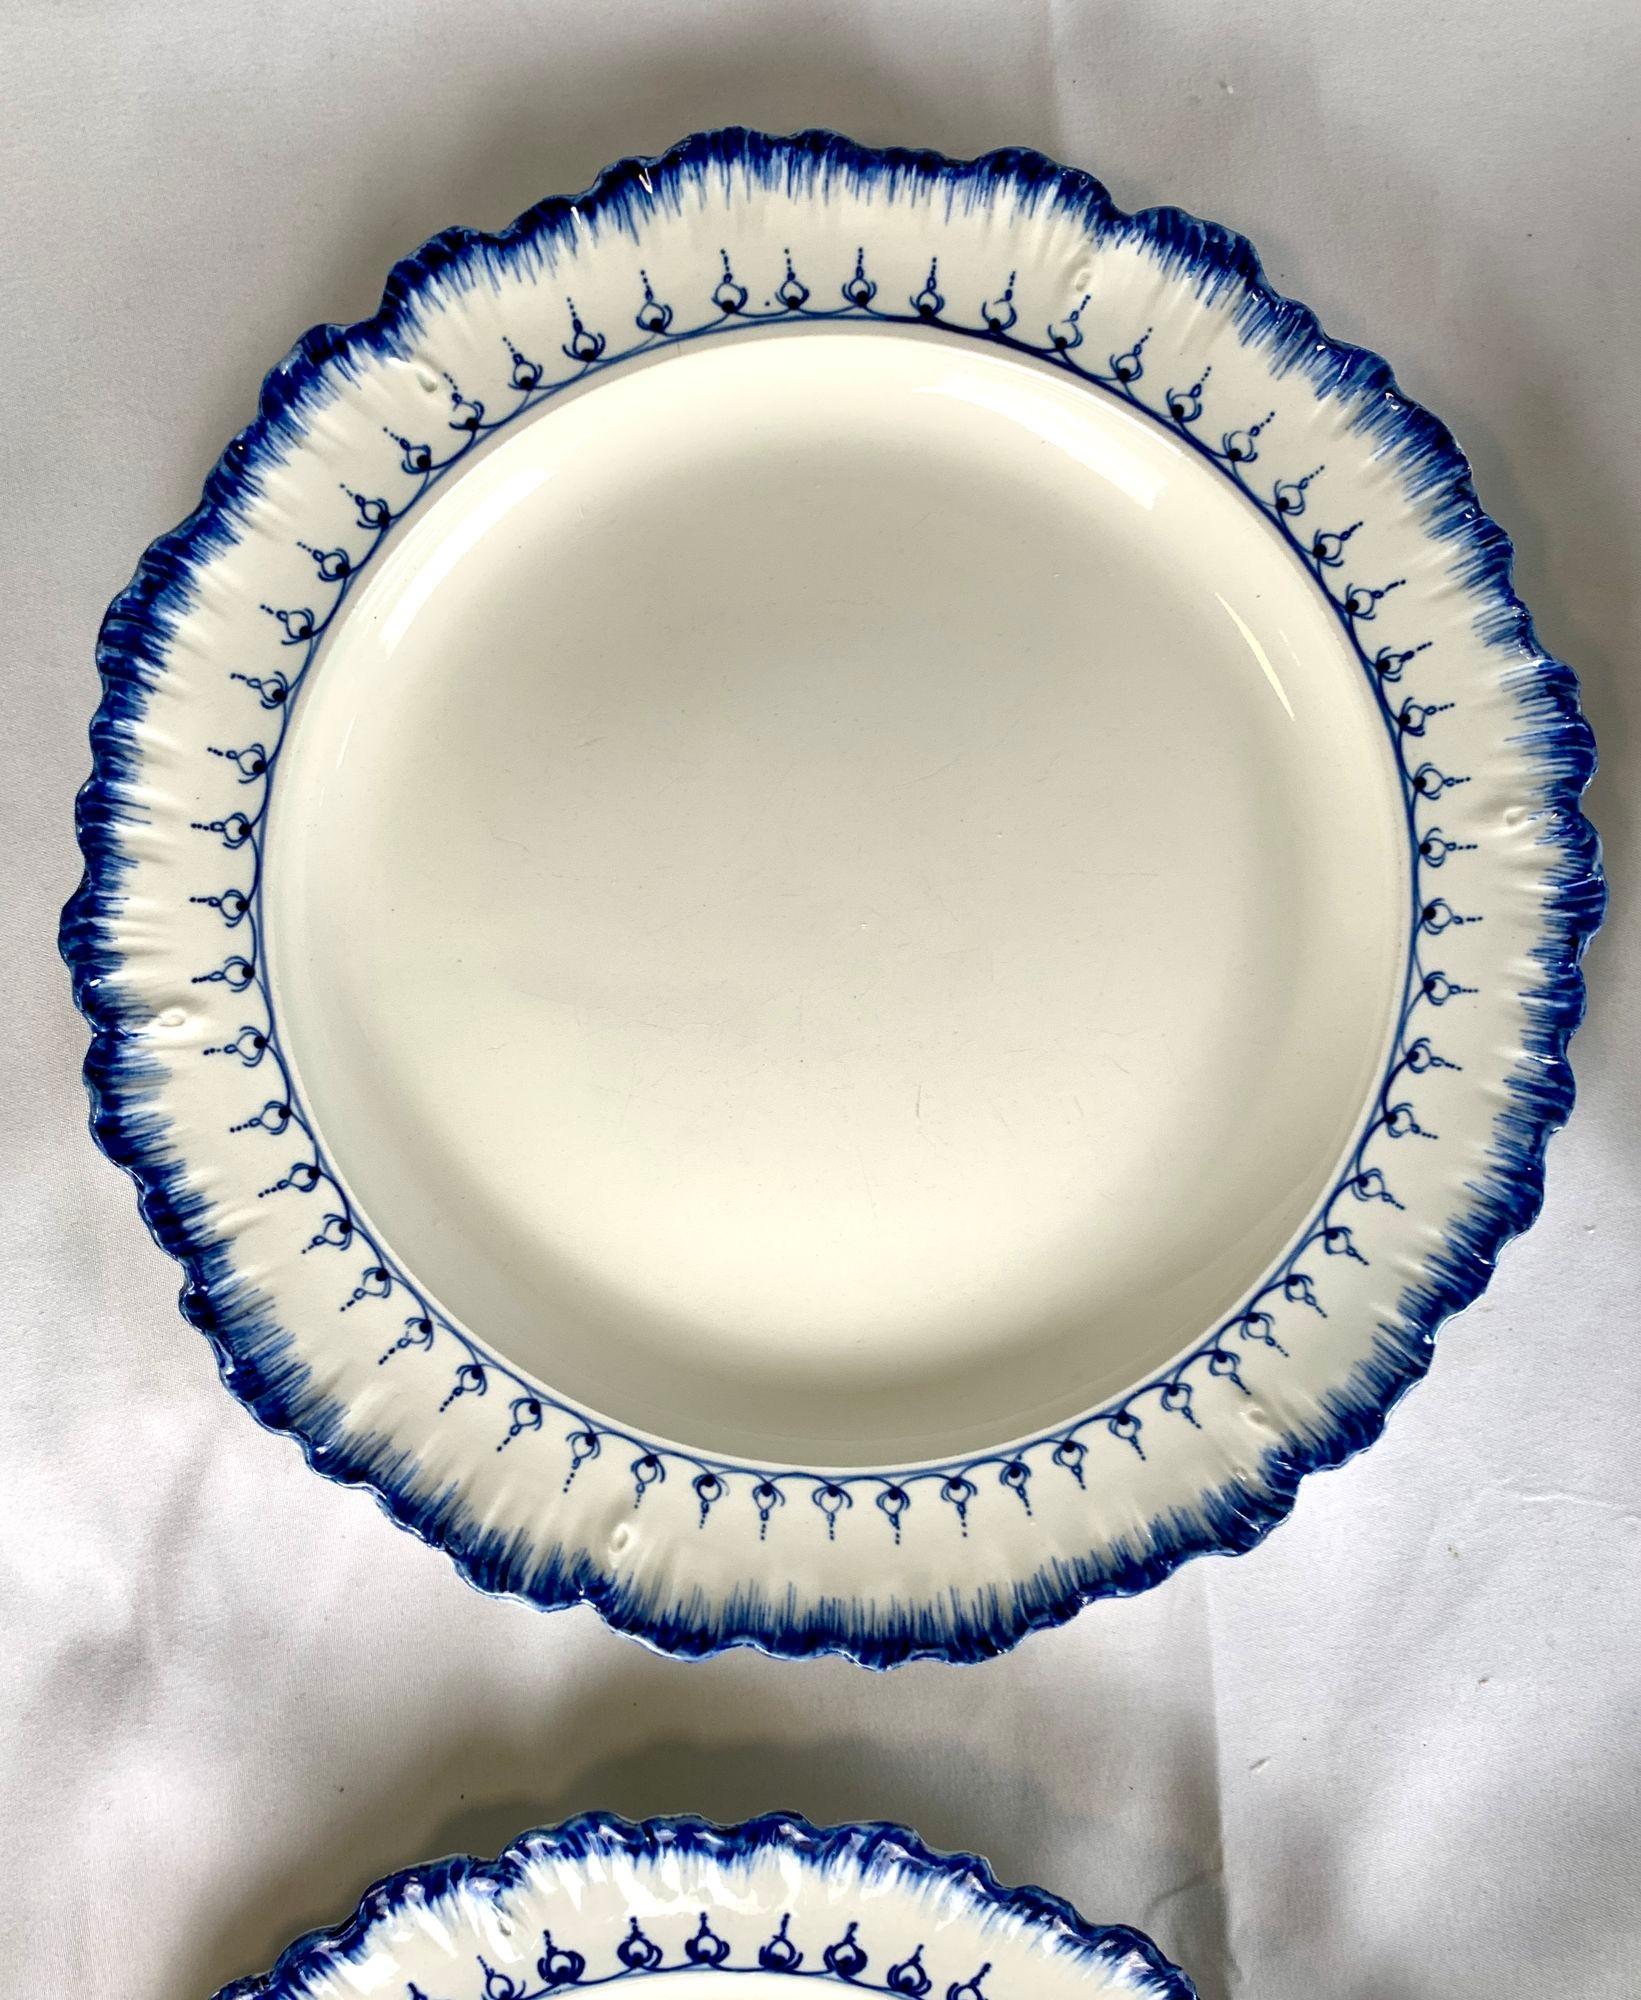 plates made in england